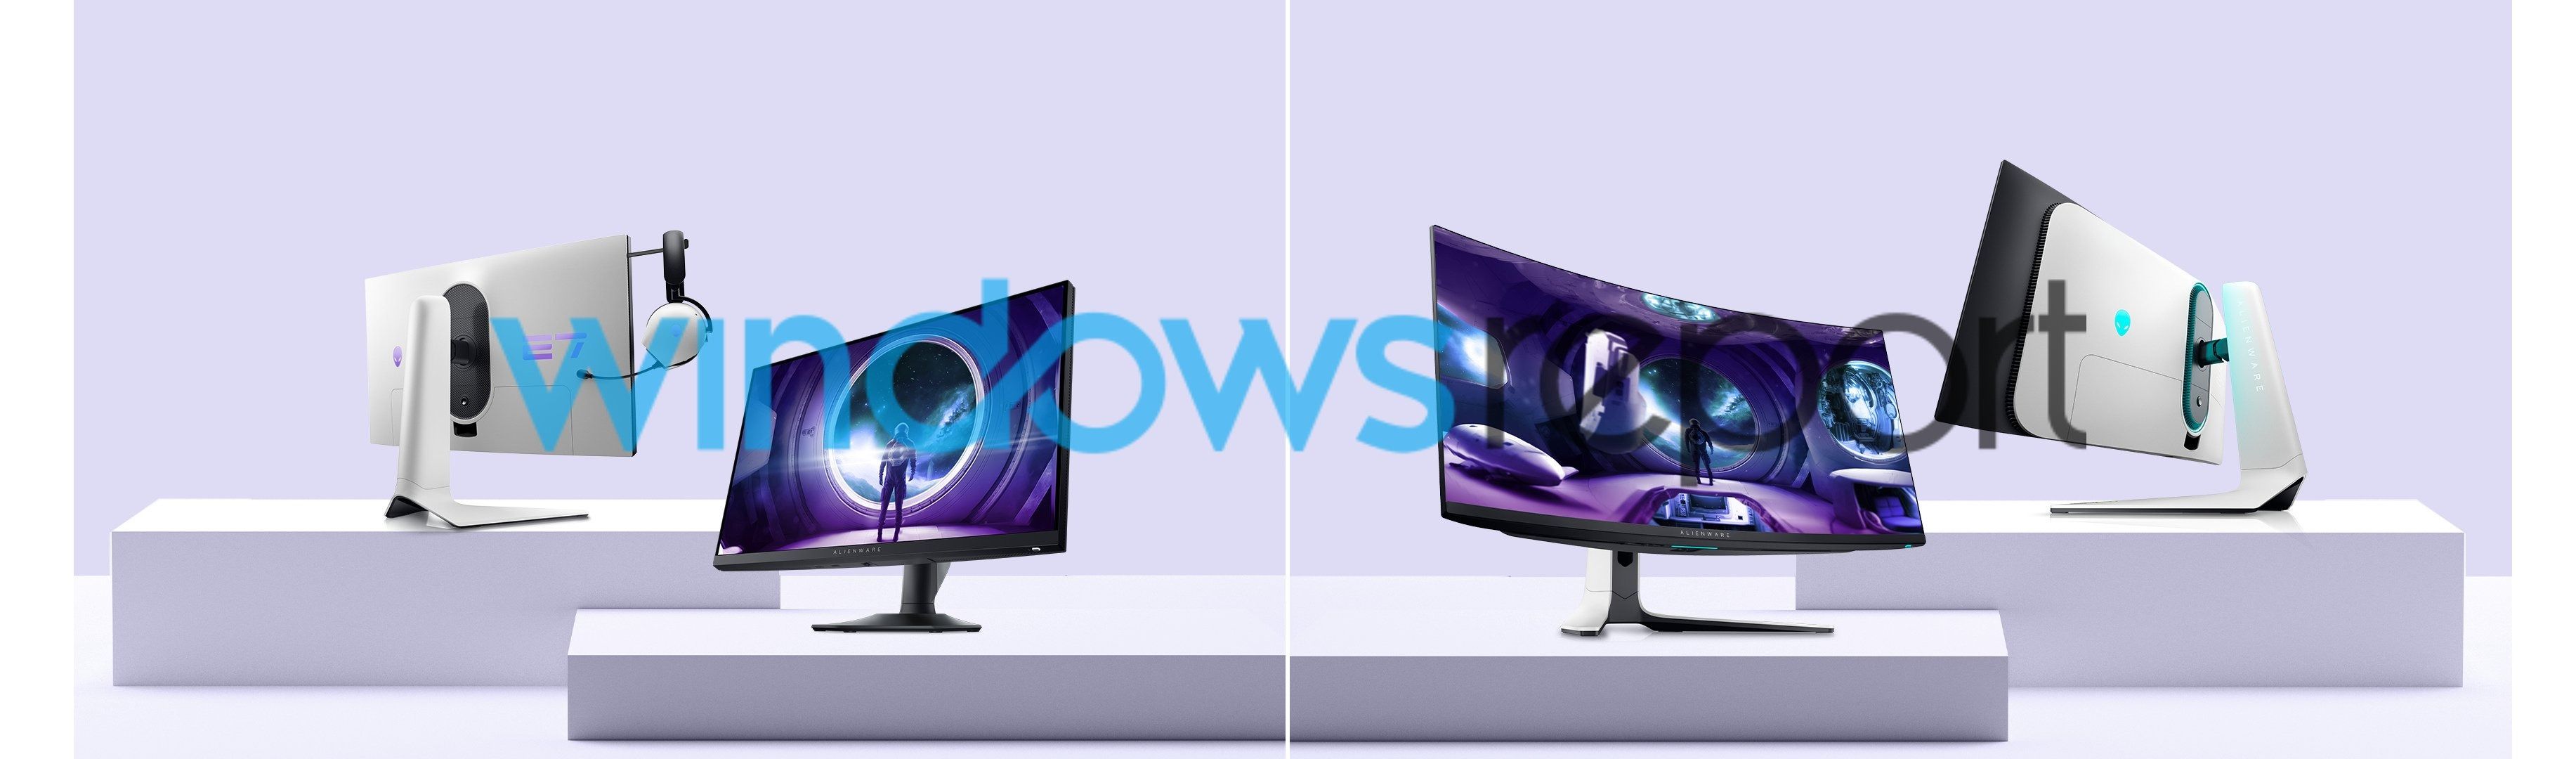 Front and rear views of the Alienware 27-inch and 32-inch monitors